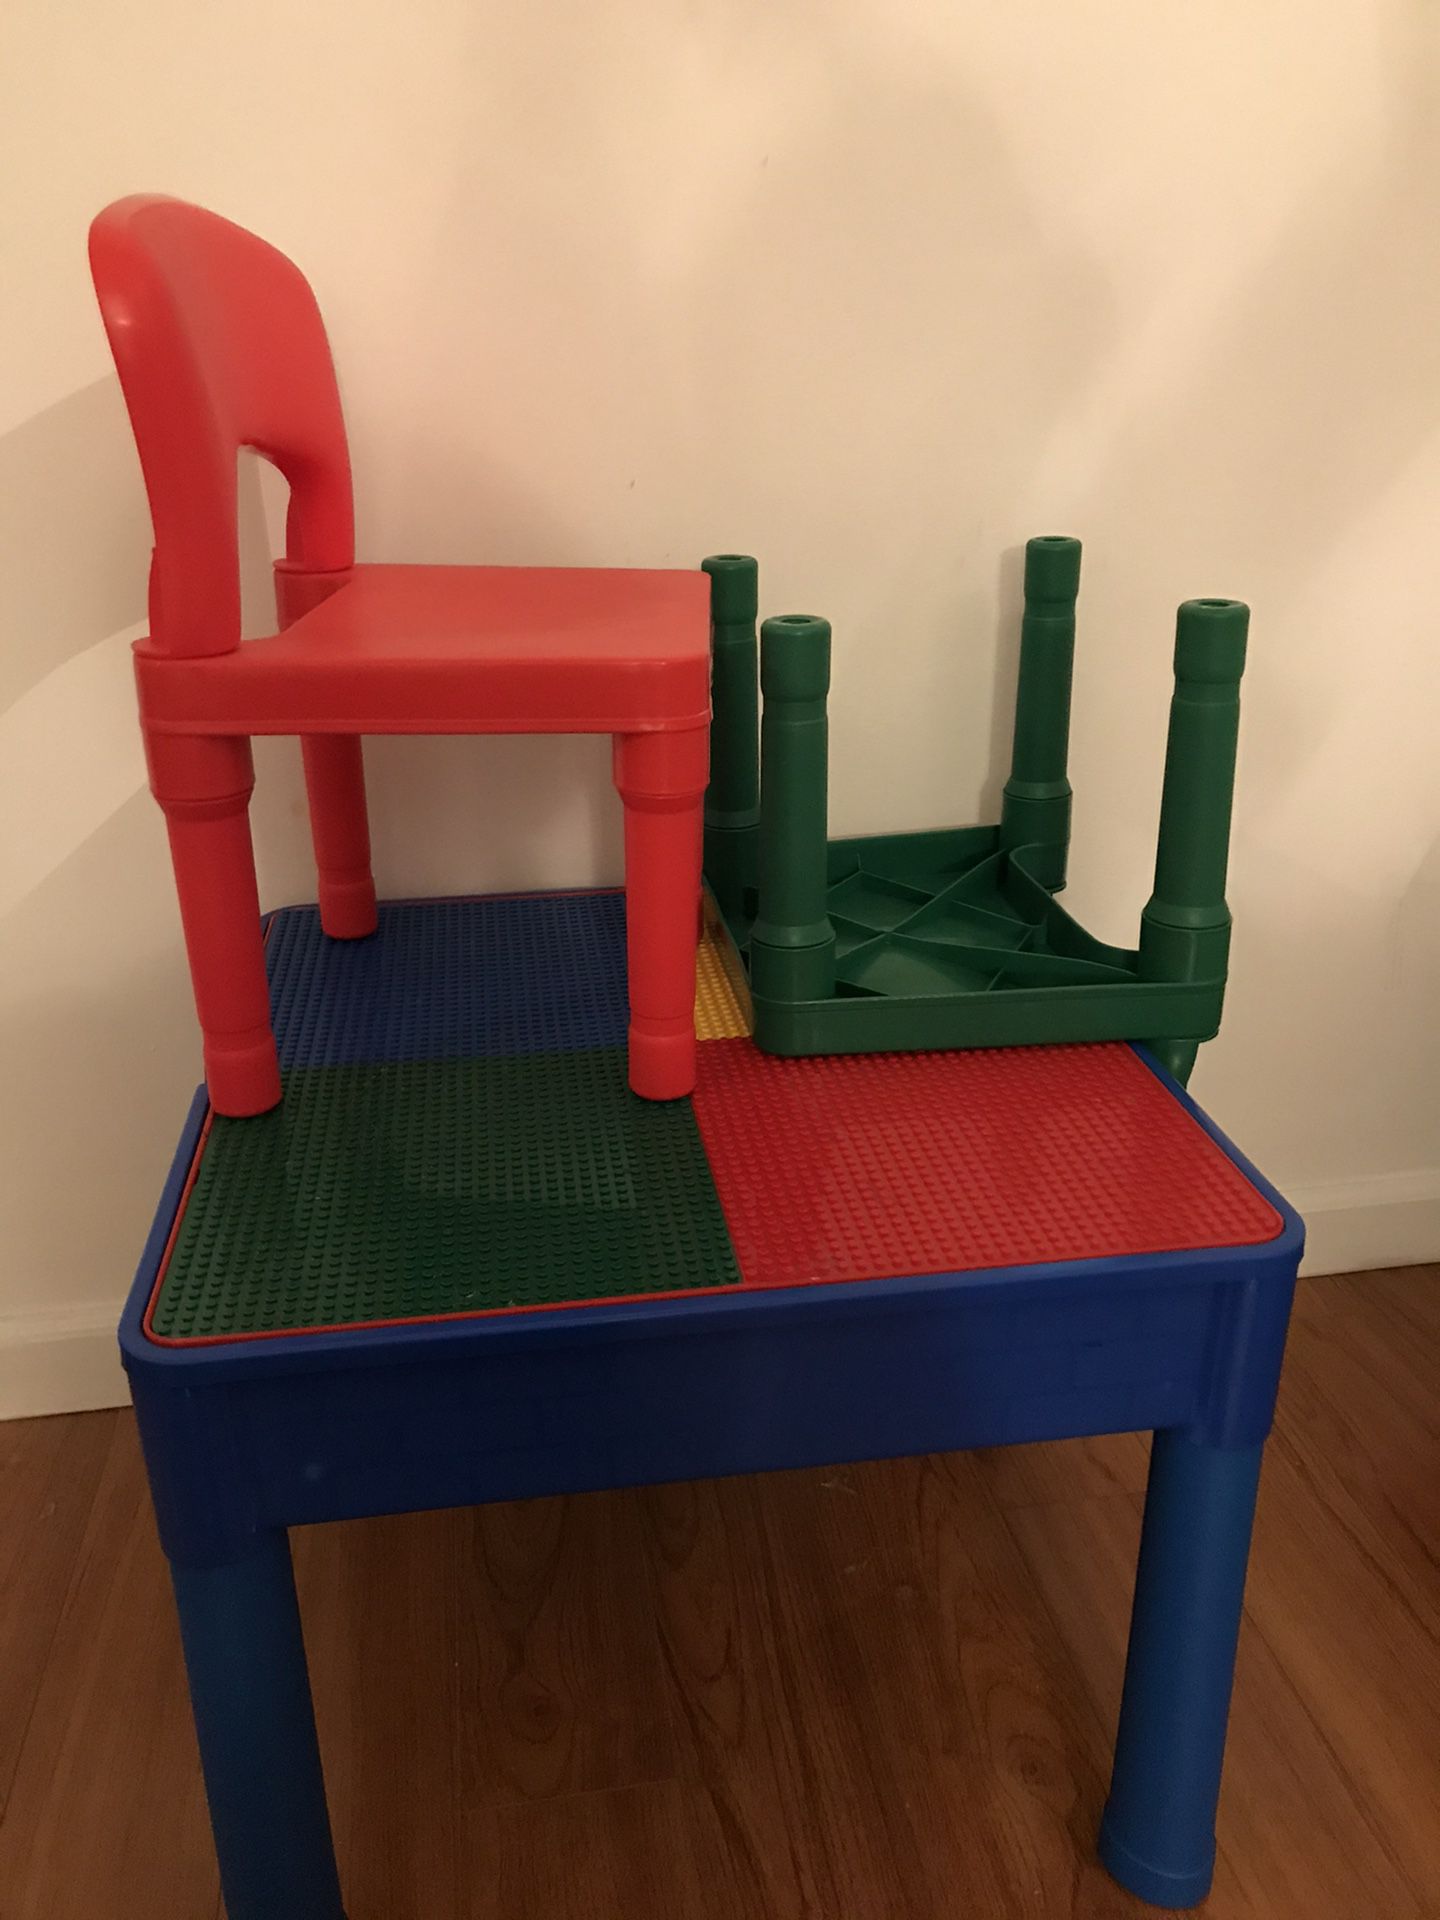 Kid’s table and chairs set